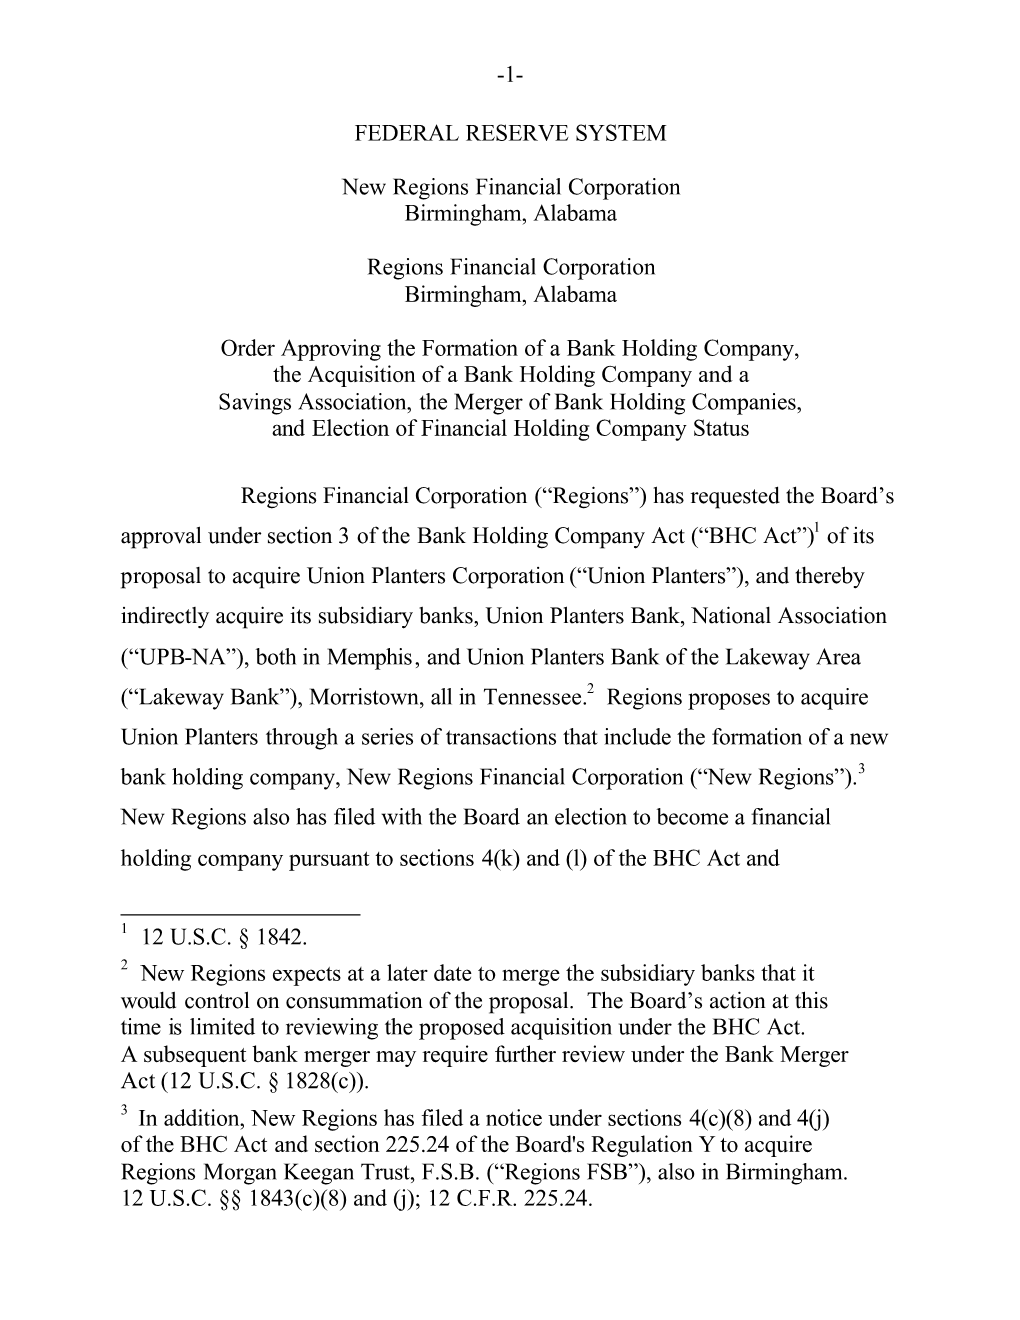 Approval of Proposal by Regions Financial Corporation